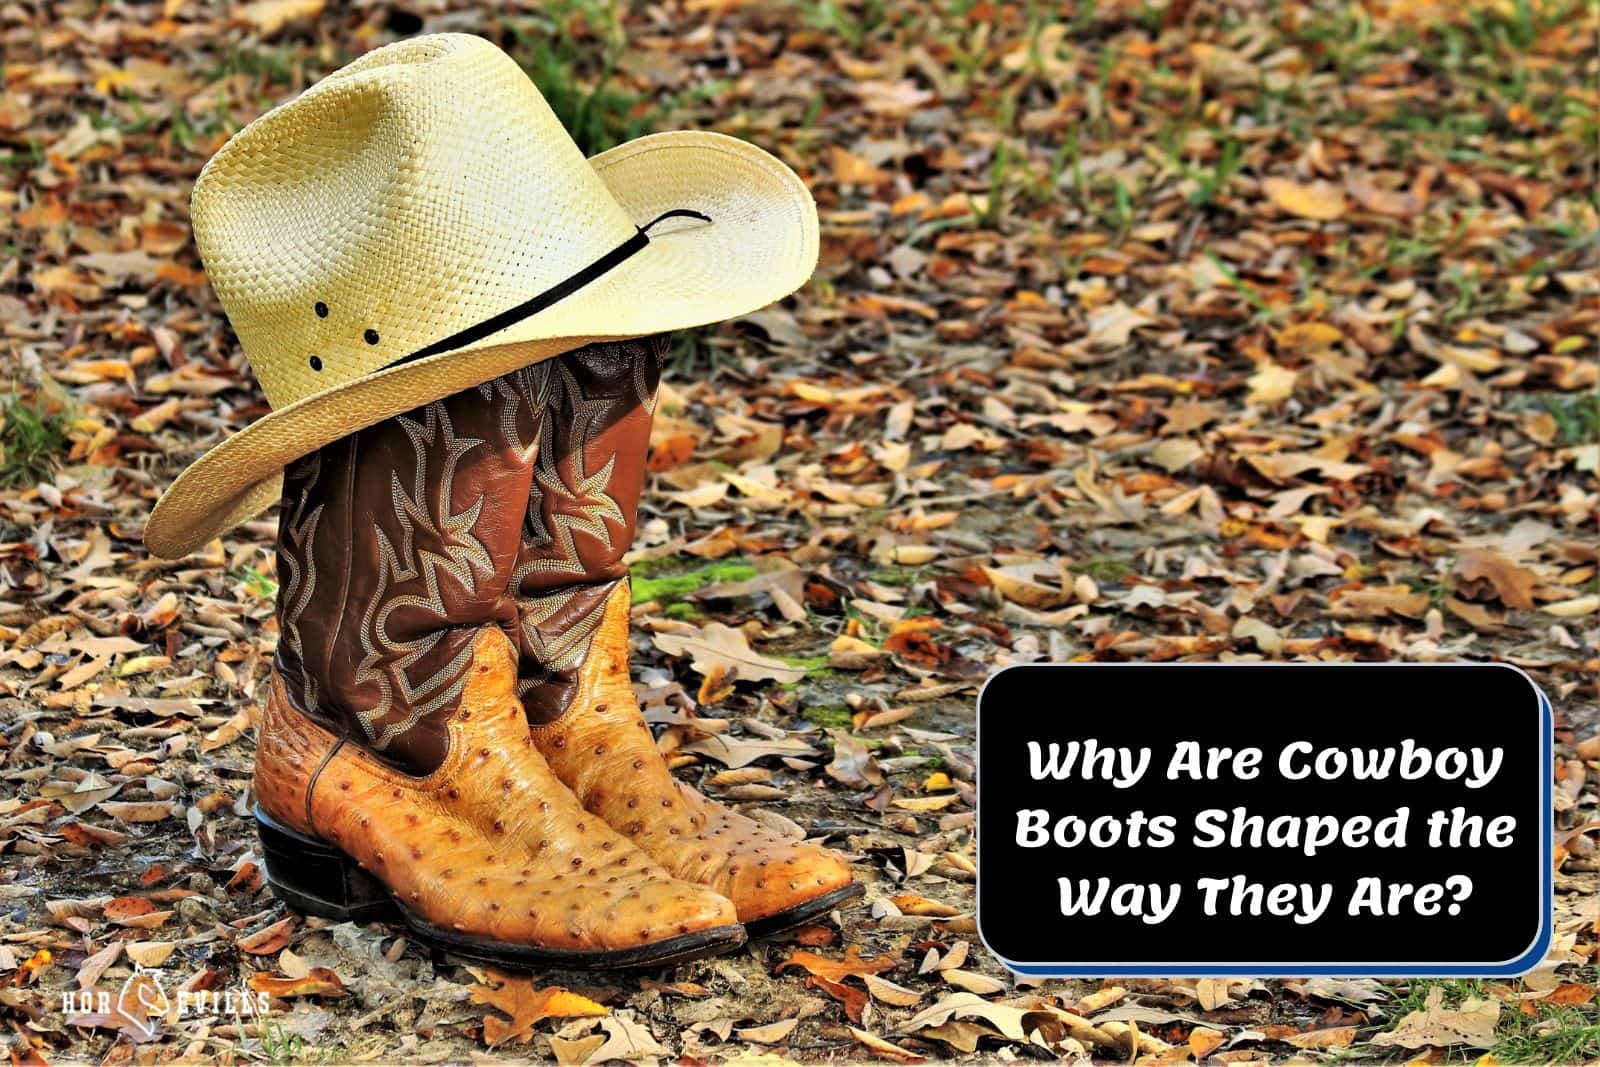 a hat on top of cowboy boots